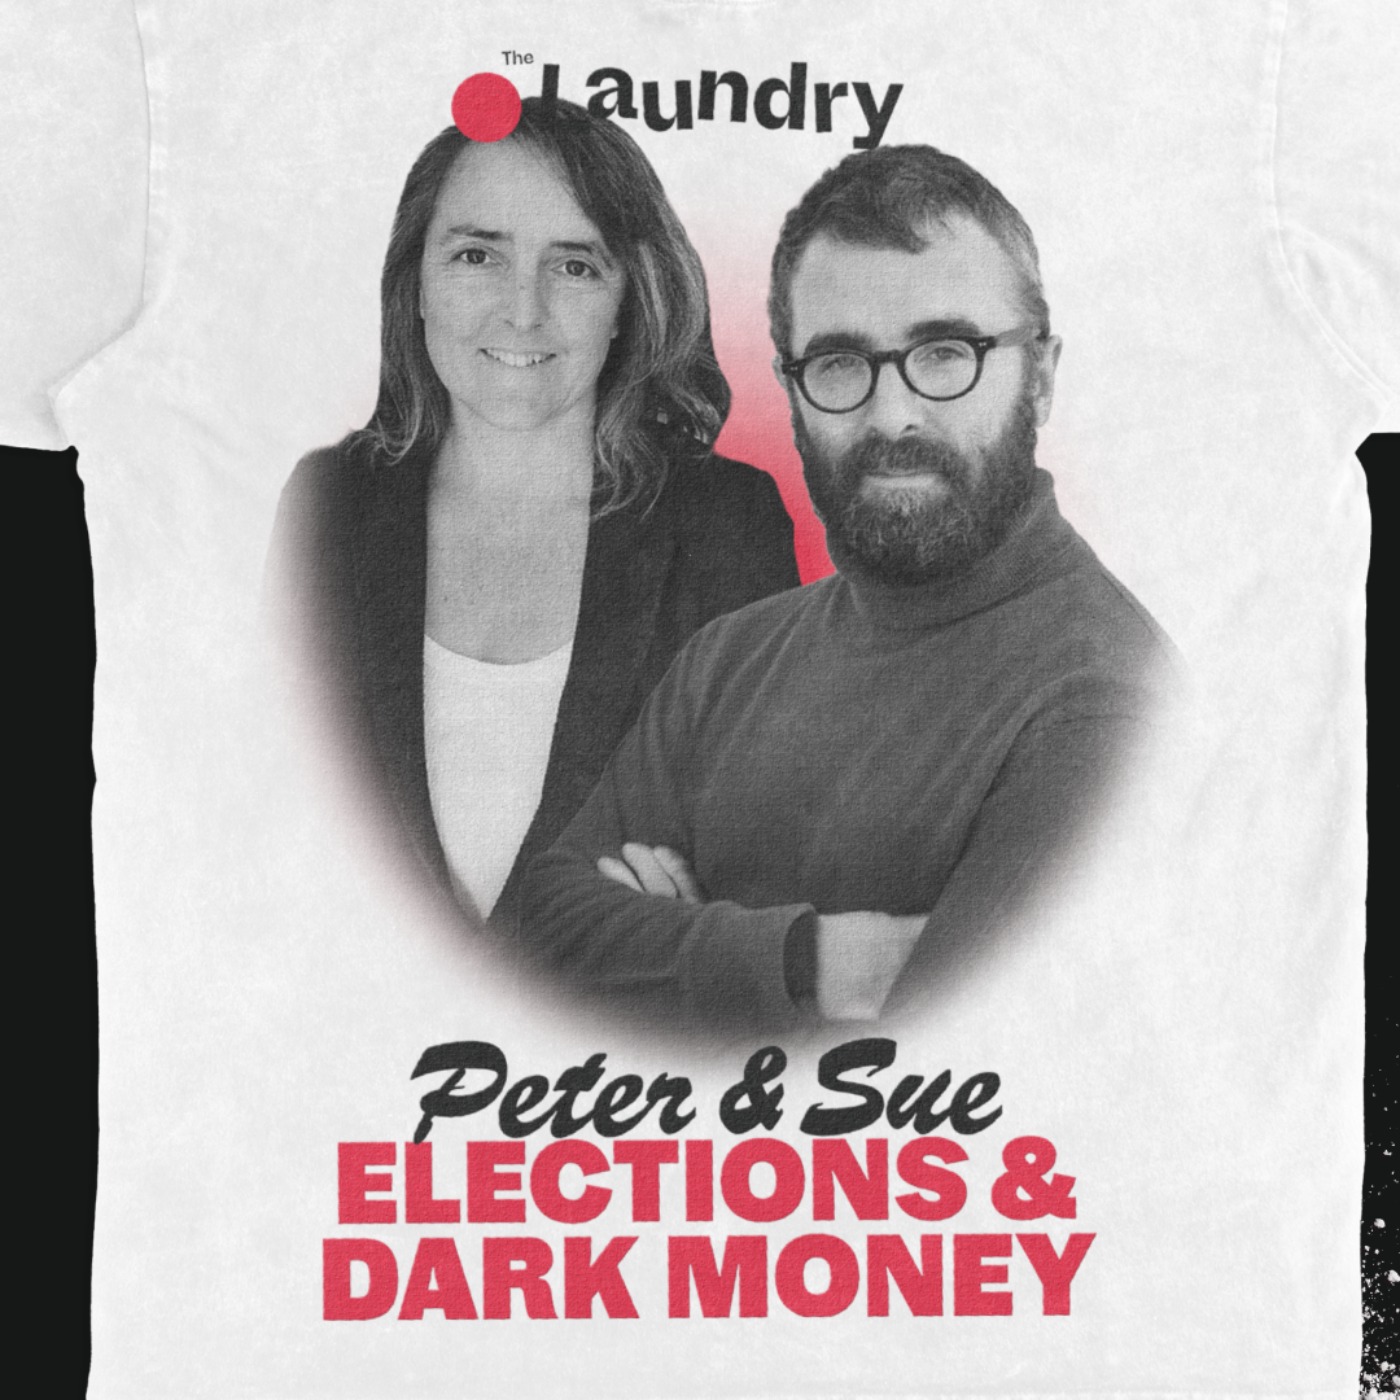 E73: Know Your Donor: How elections are influenced by dark money